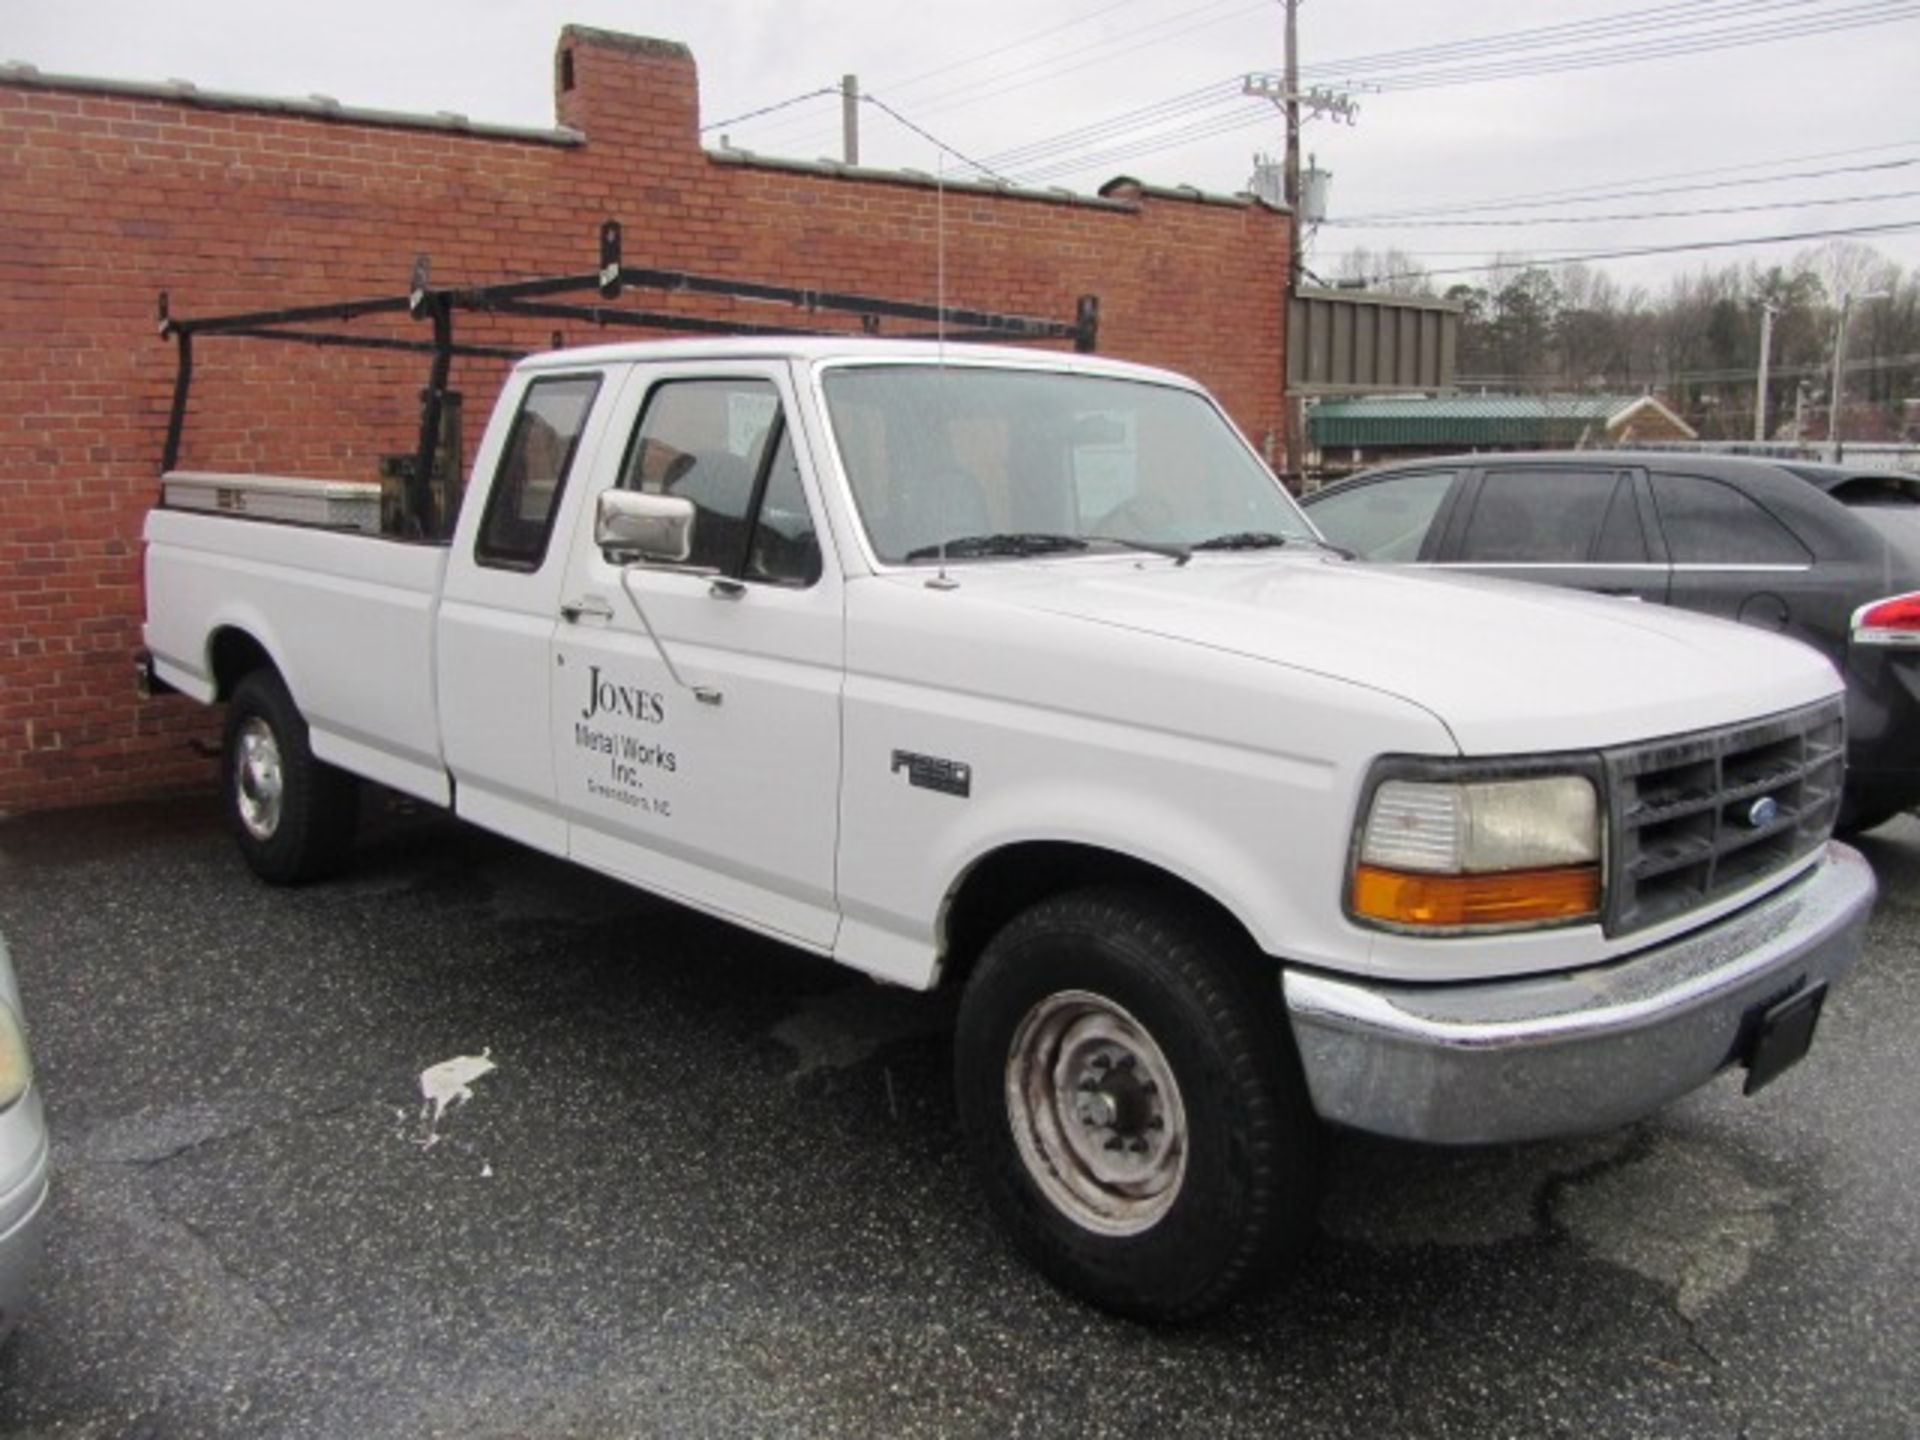 Ford F250 Heavy Duty Pick-Up Truck with Extended Cab, Aluminum Work Boxes, Work Bed, Dual Gas Tanks, - Image 2 of 5